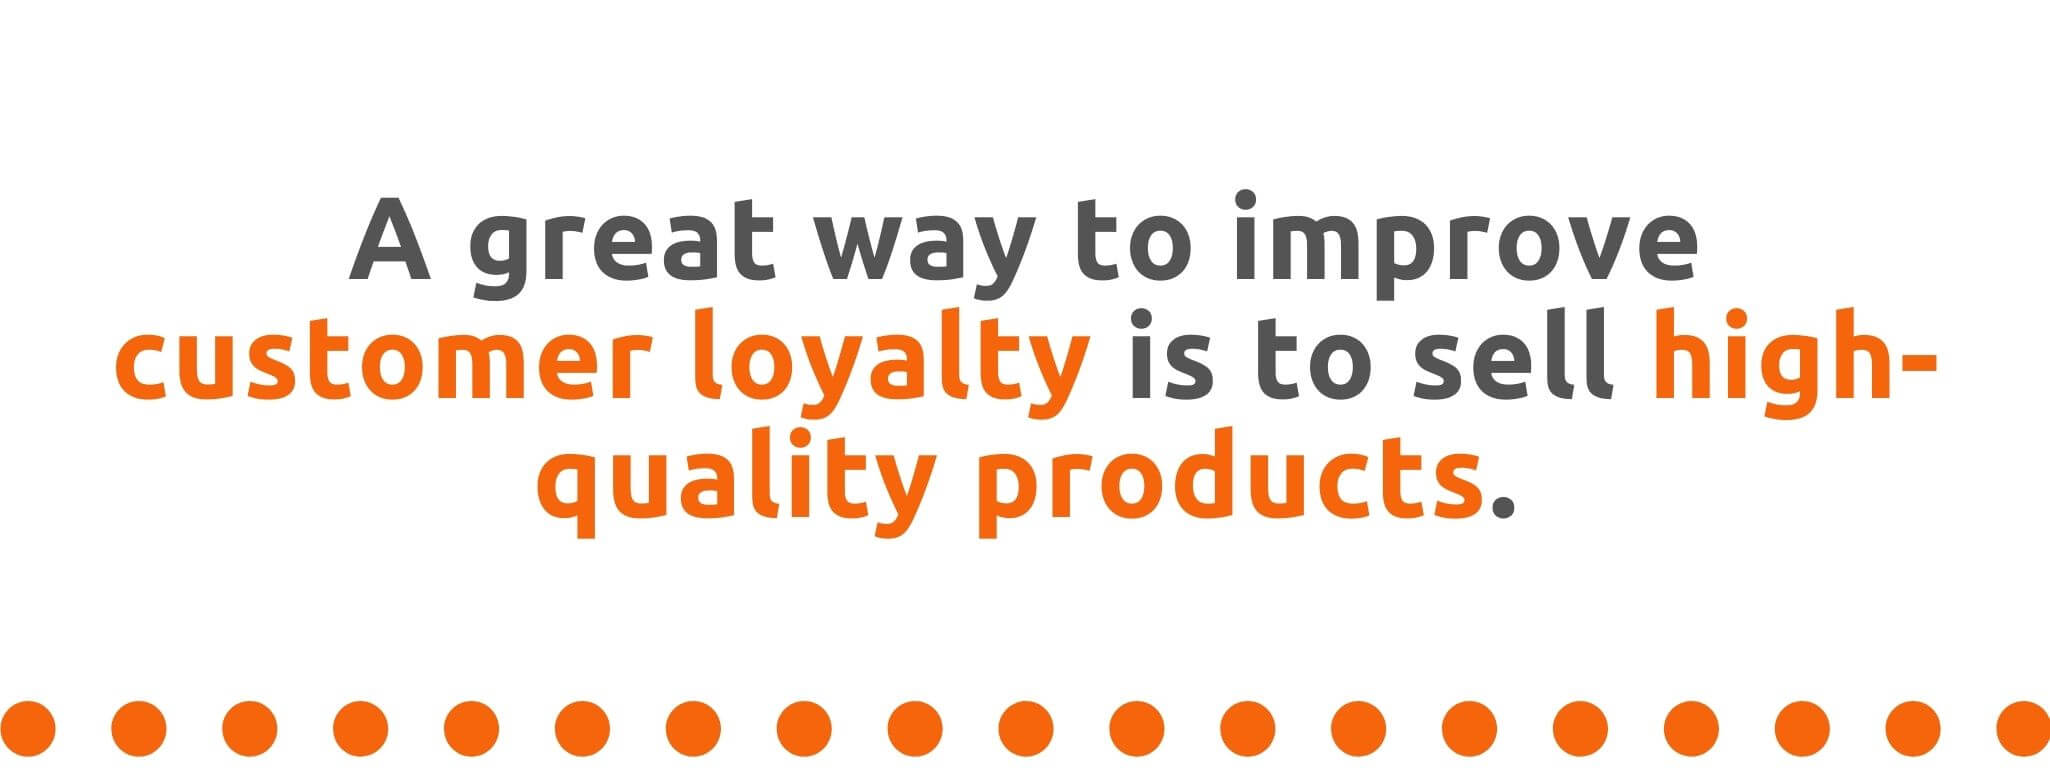 A great way to improve customer loyalty is to sell high-quality products - 21 Ways to Encourage Customer Loyalty - Replyco